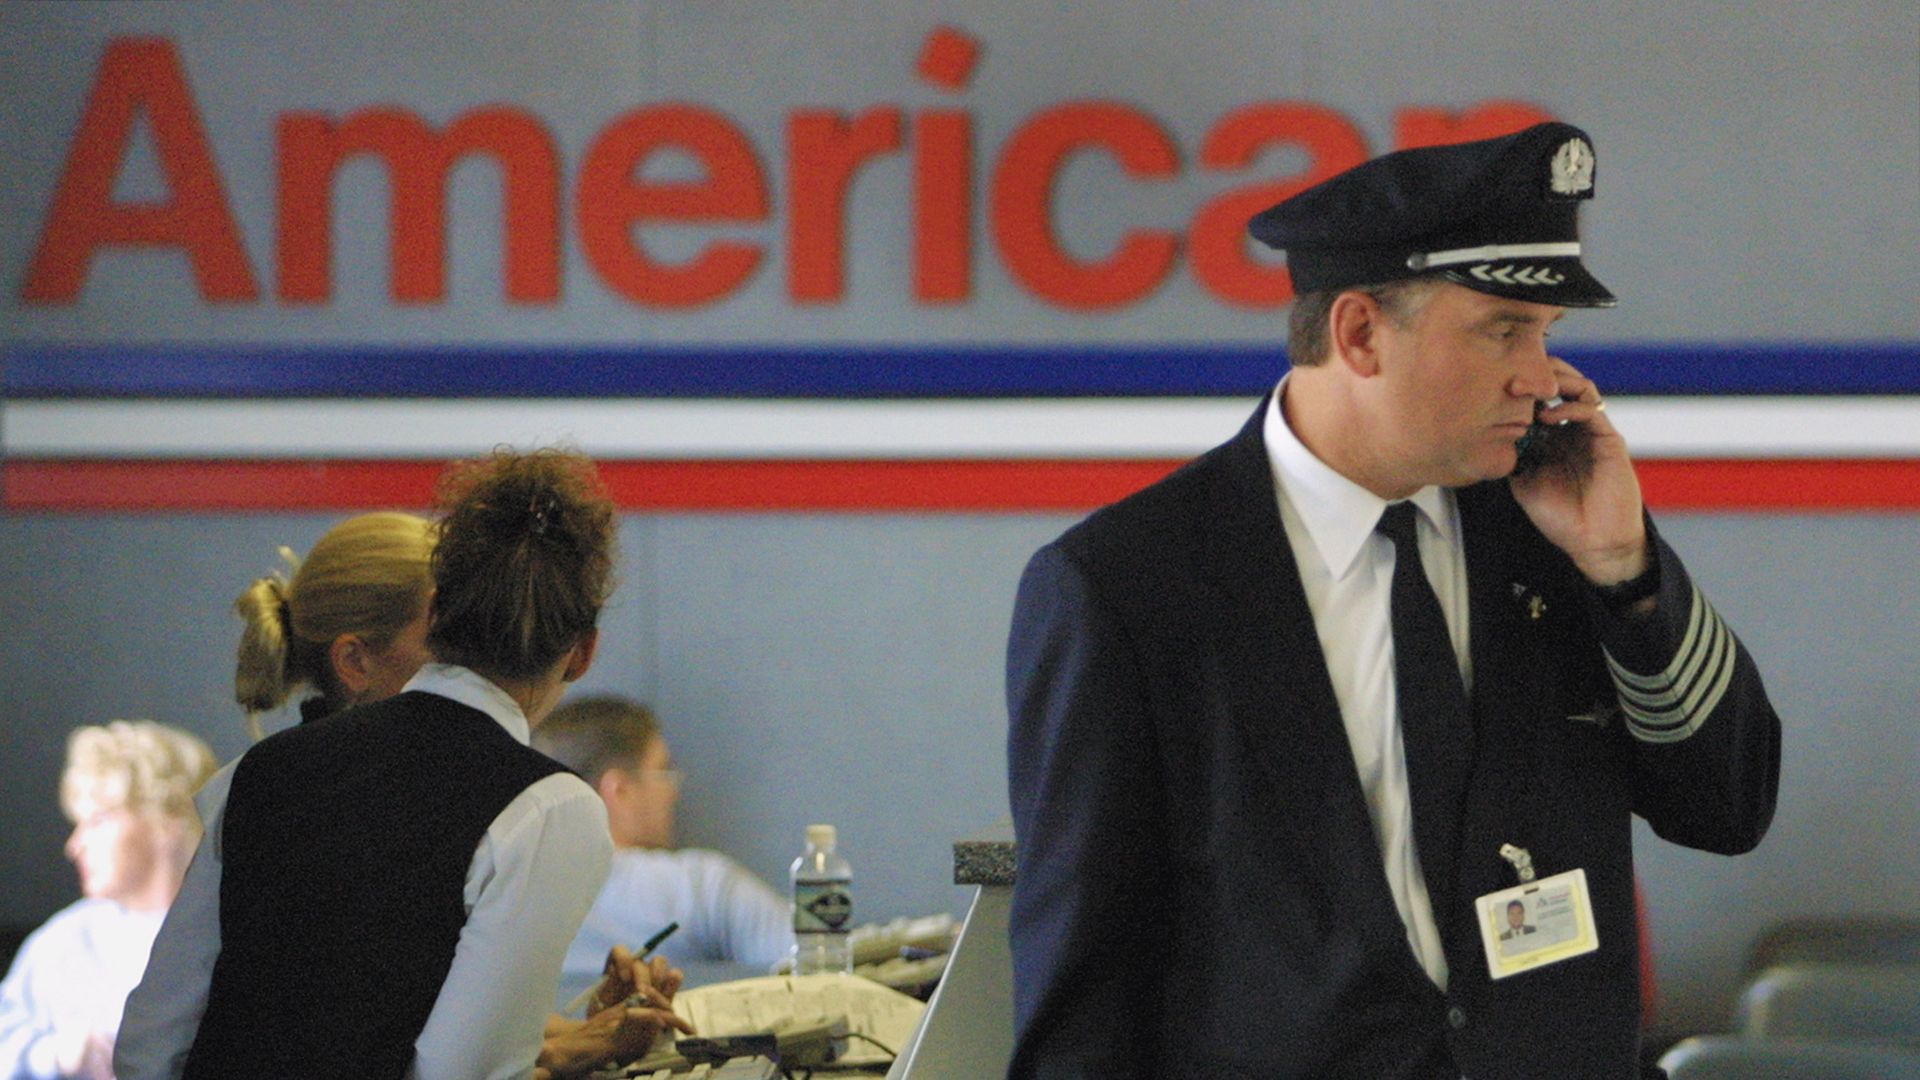 A pilot talks on the phone in front the American Airlines logo and two gate workers